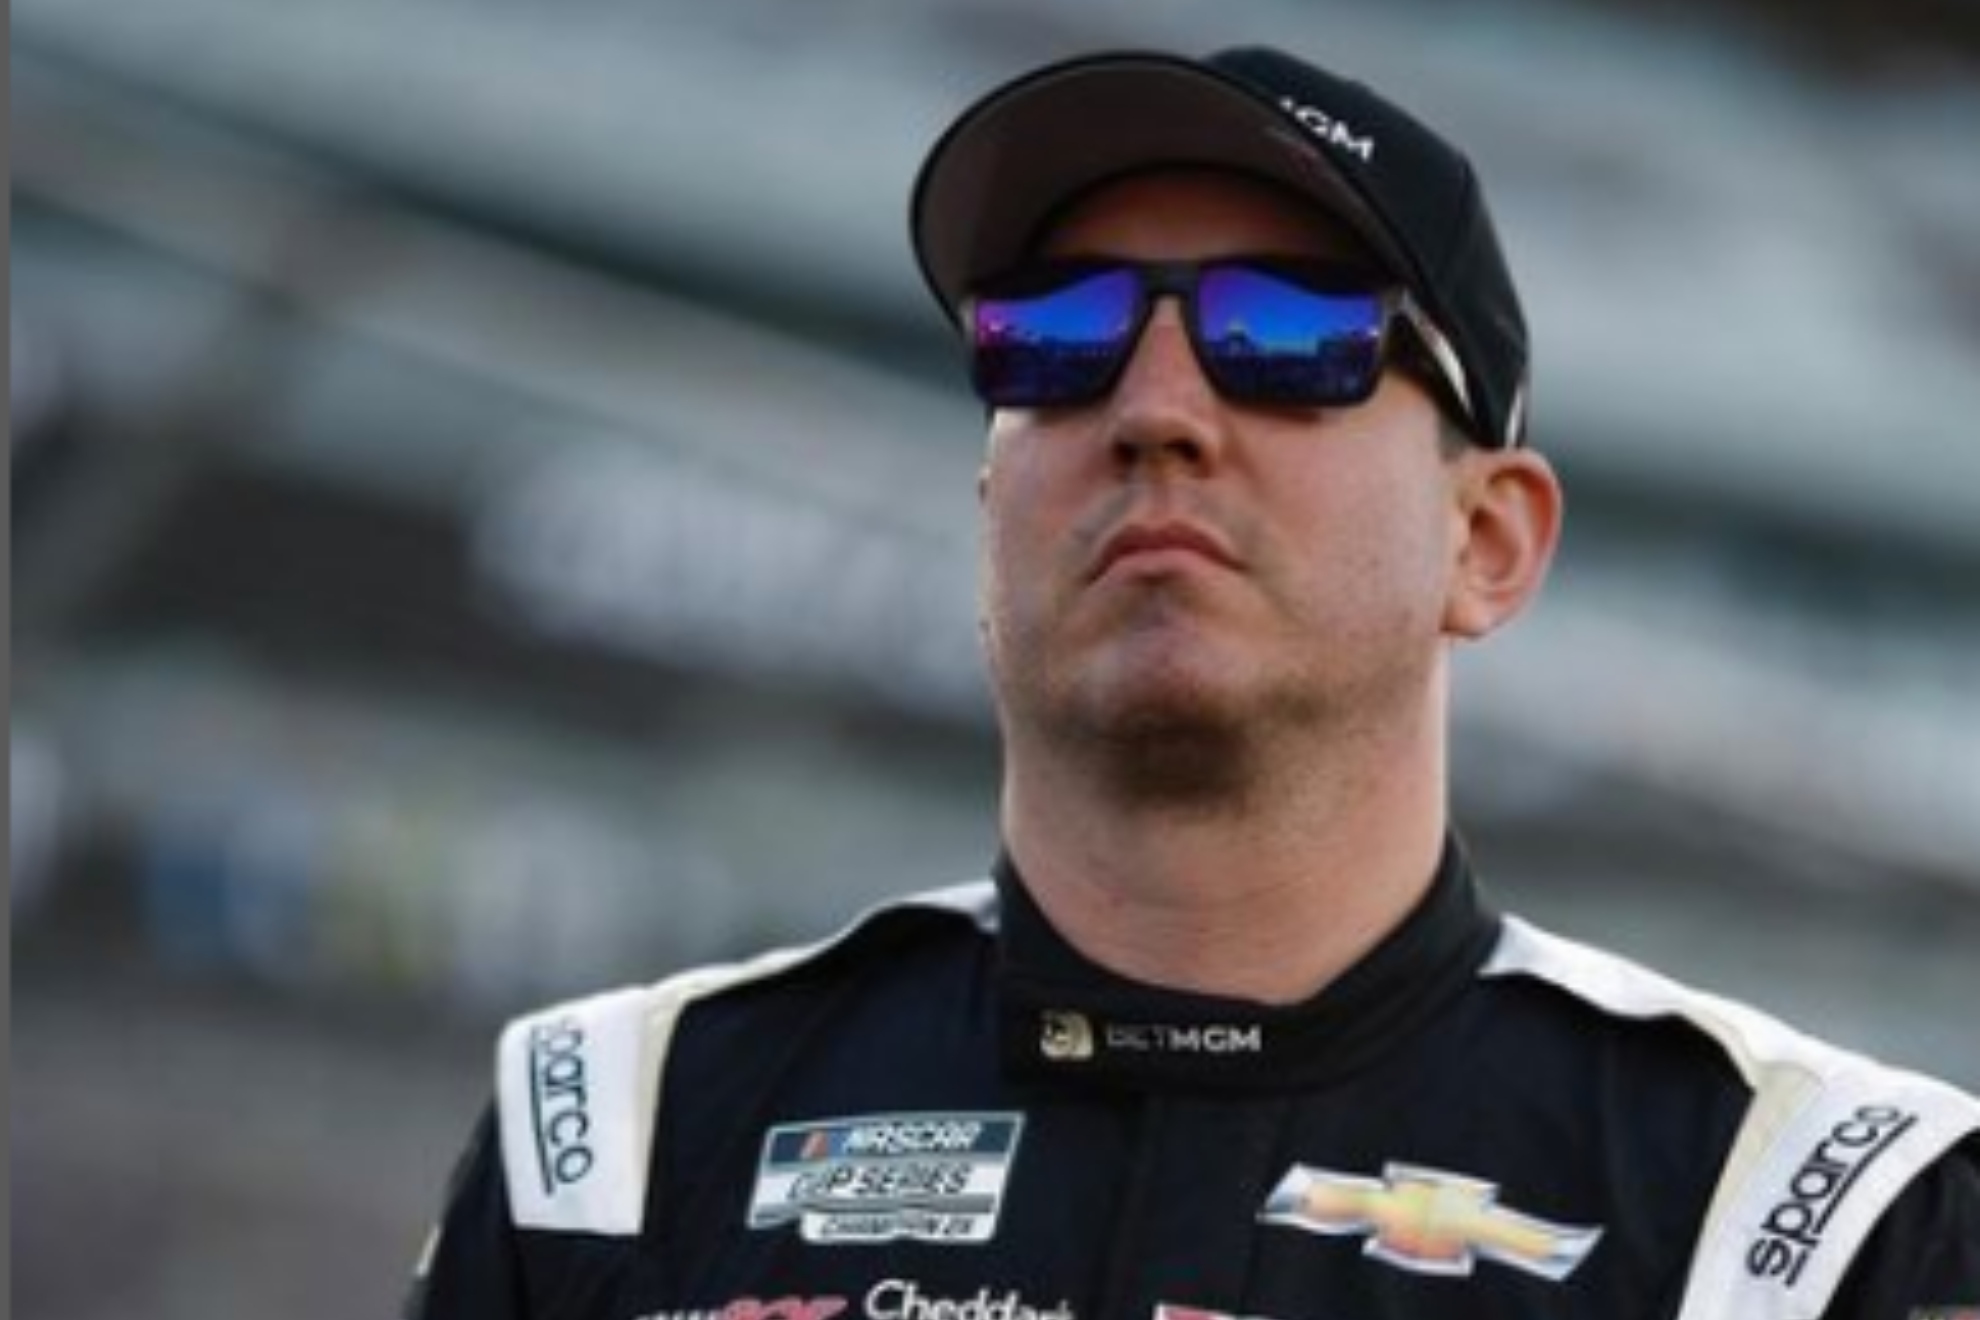 NASCAR racer Kyle Busch was detained in Mexico for traveling with a handgun to the Caribbean